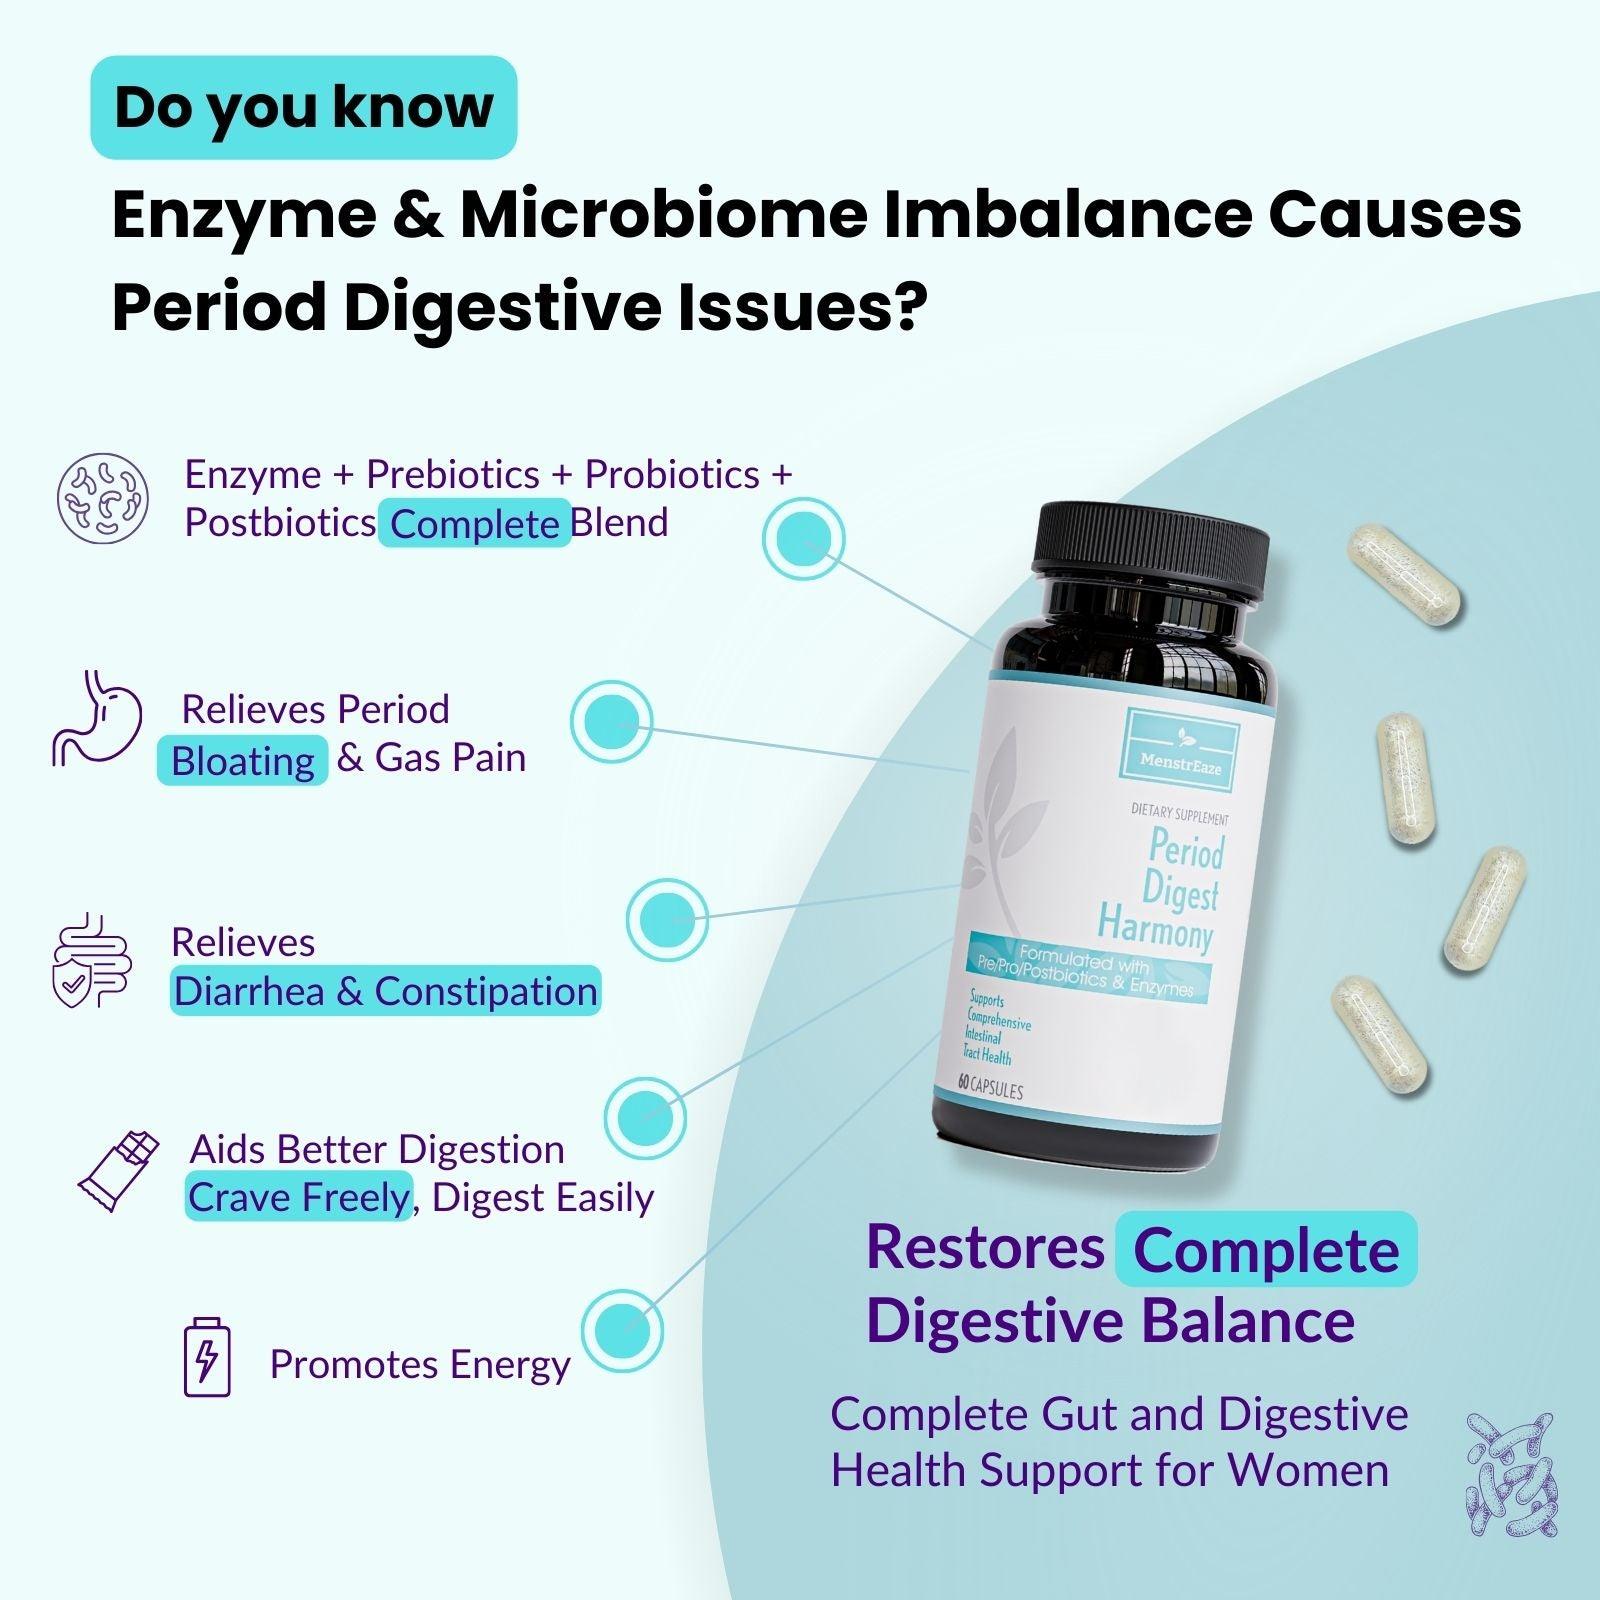 Period Digest Harmony: Period Digestive Support for Women - MenstrEaze: Comfort in Every Phase